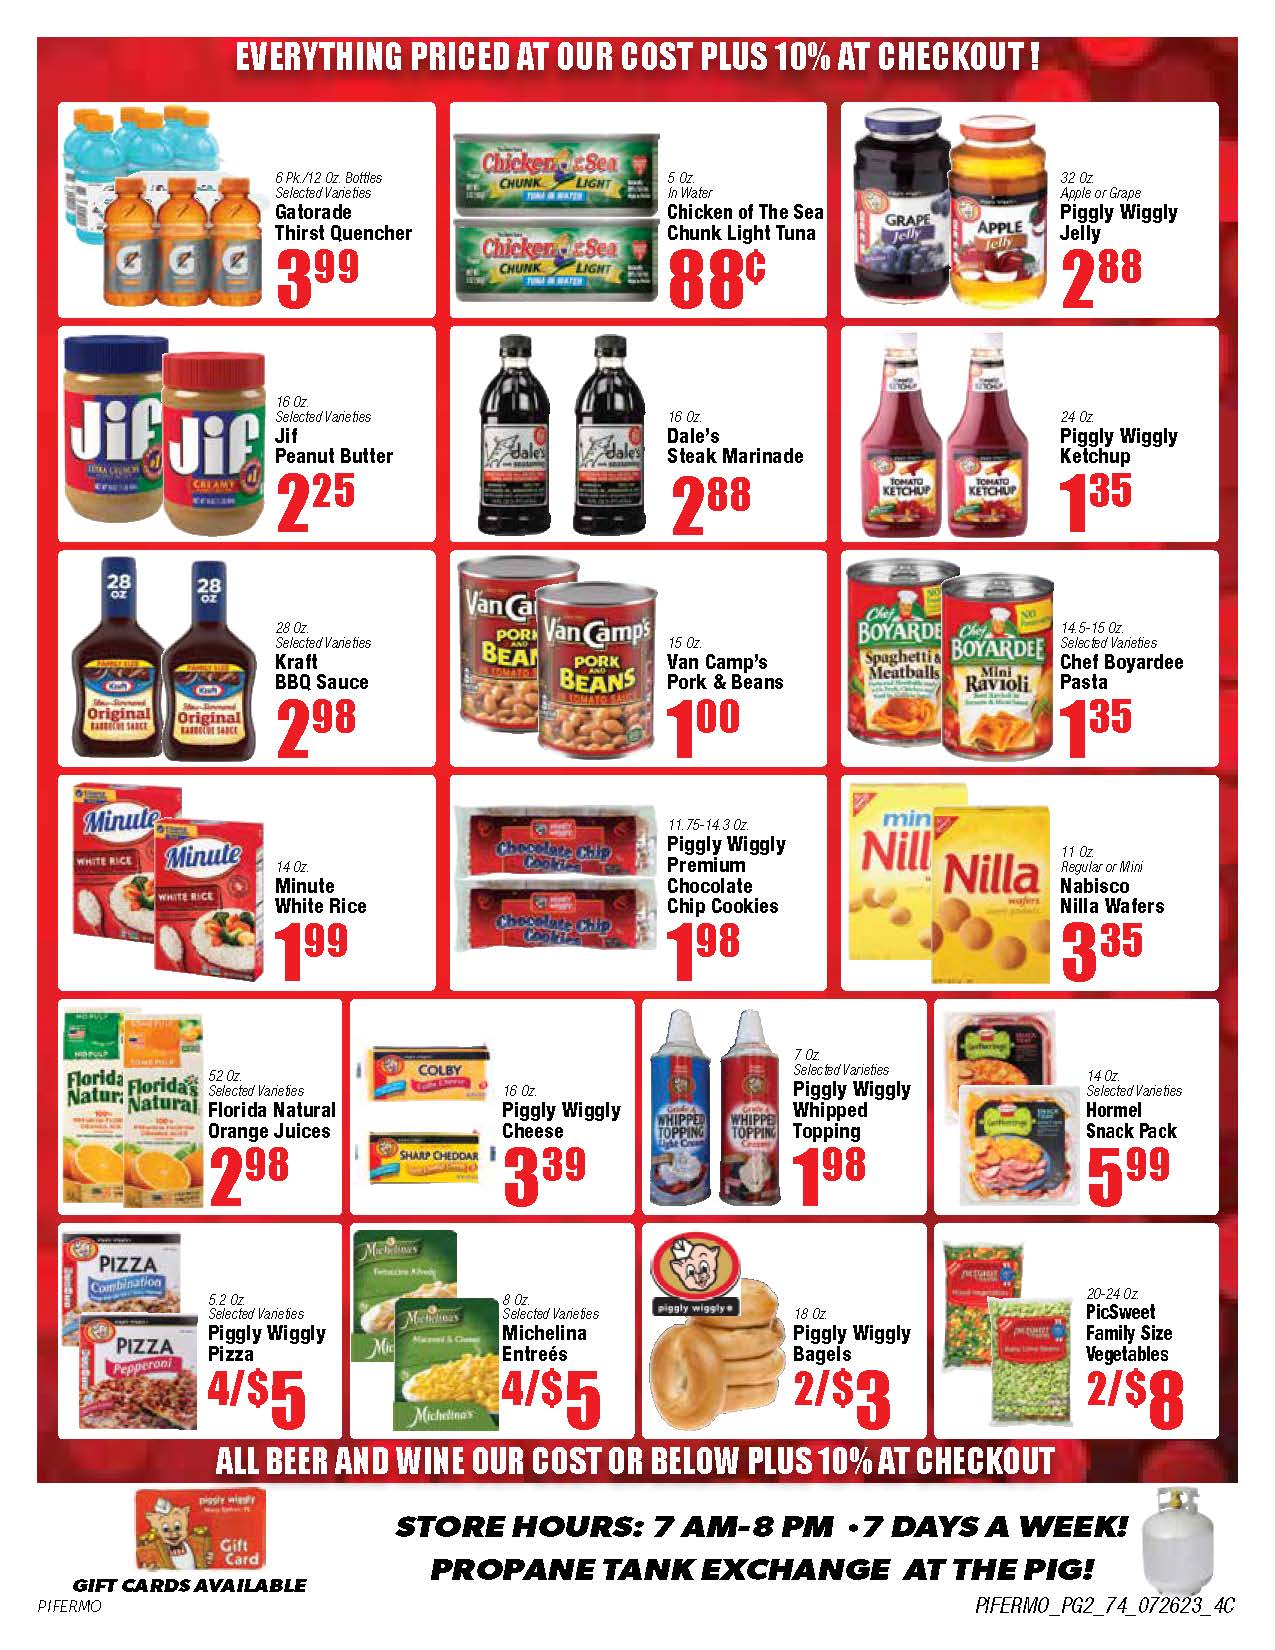 weekly piggly wiggly ad